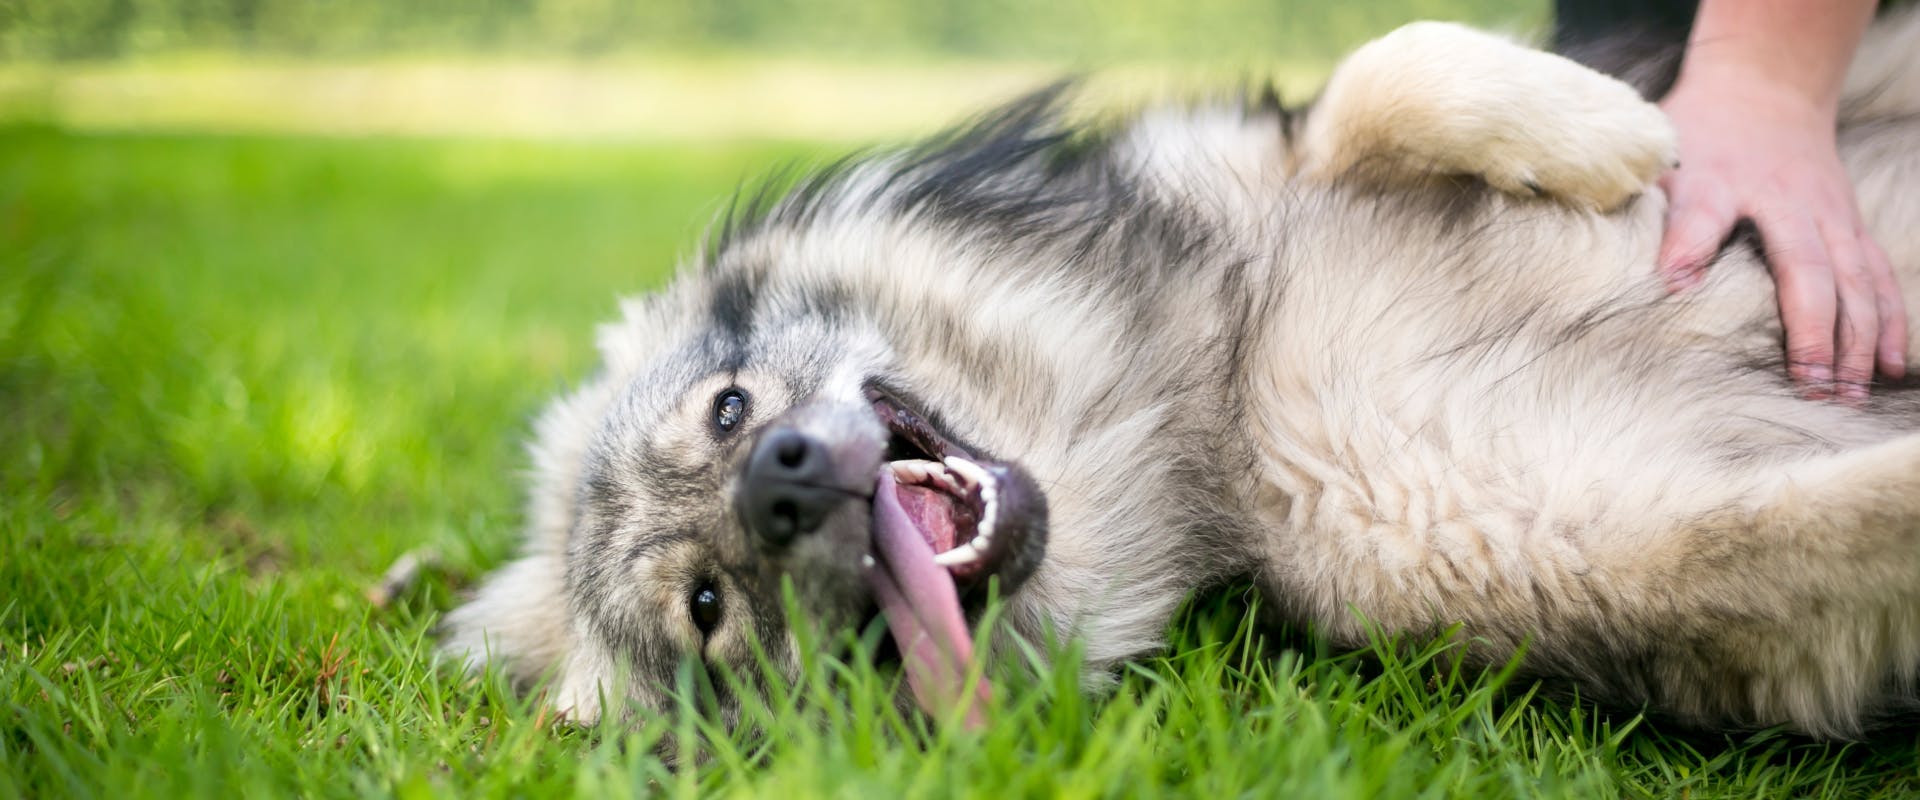 A dog showing belly with tongue lolling out.